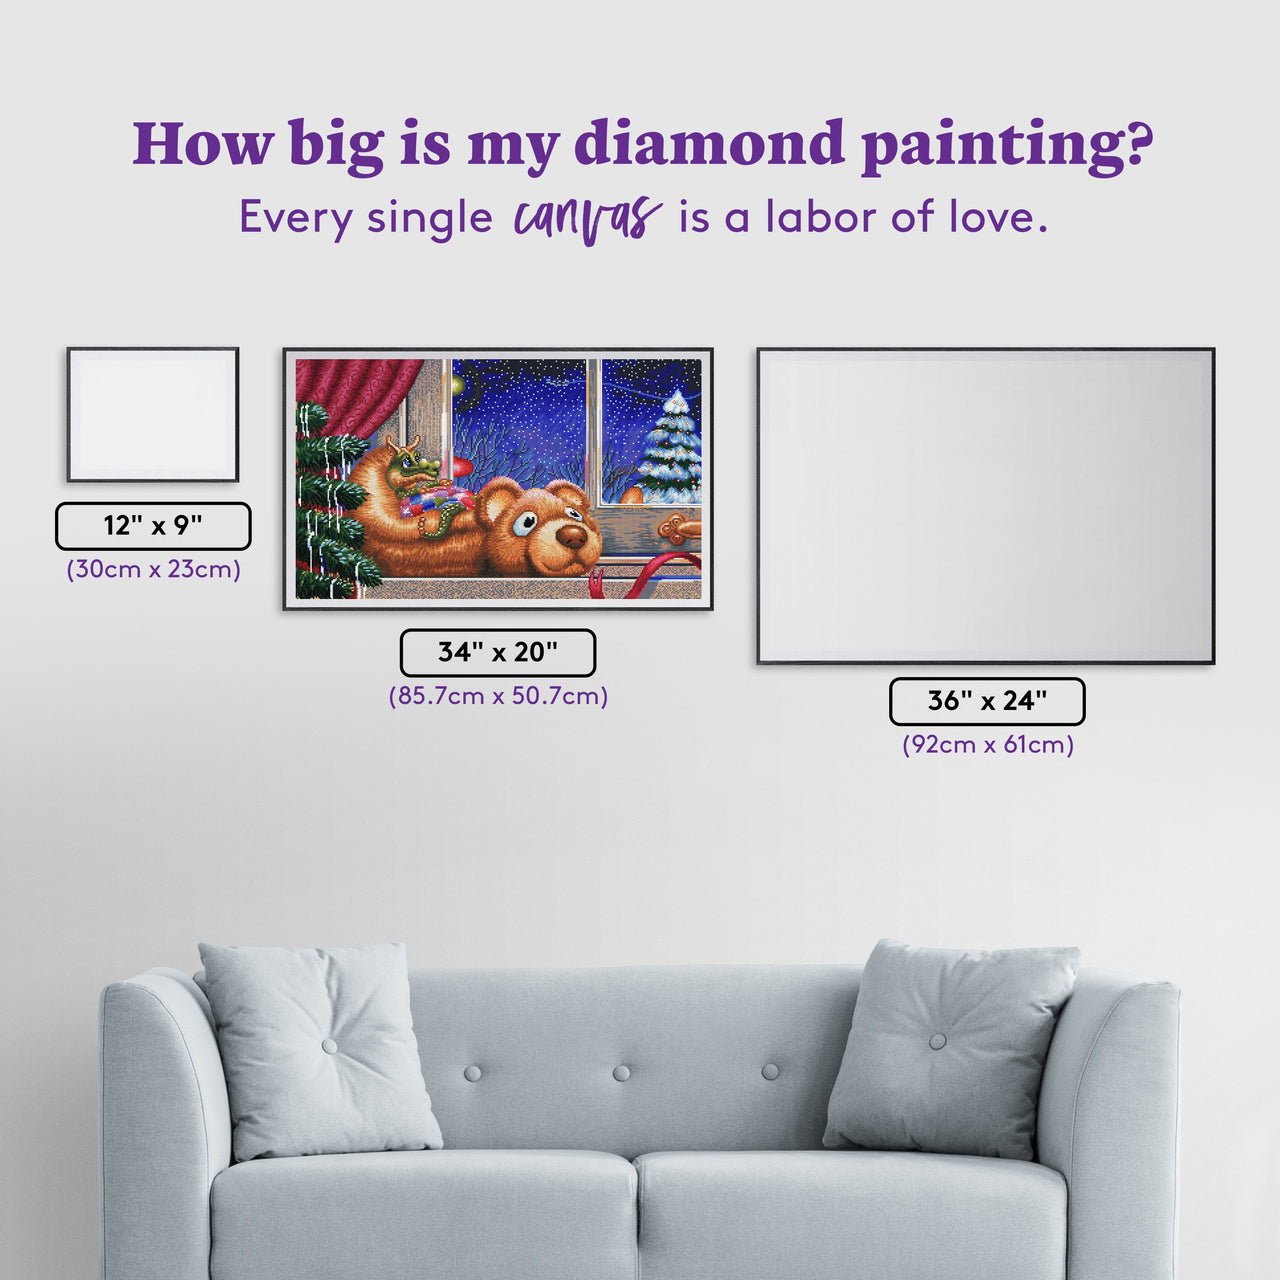 Diamond Painting Waiting for Santa 34" x 20" (85.7cm x 50.7cm) / Round with 60 Colors including 2 ABs and 2 Fairy Dust Diamonds / 55,386